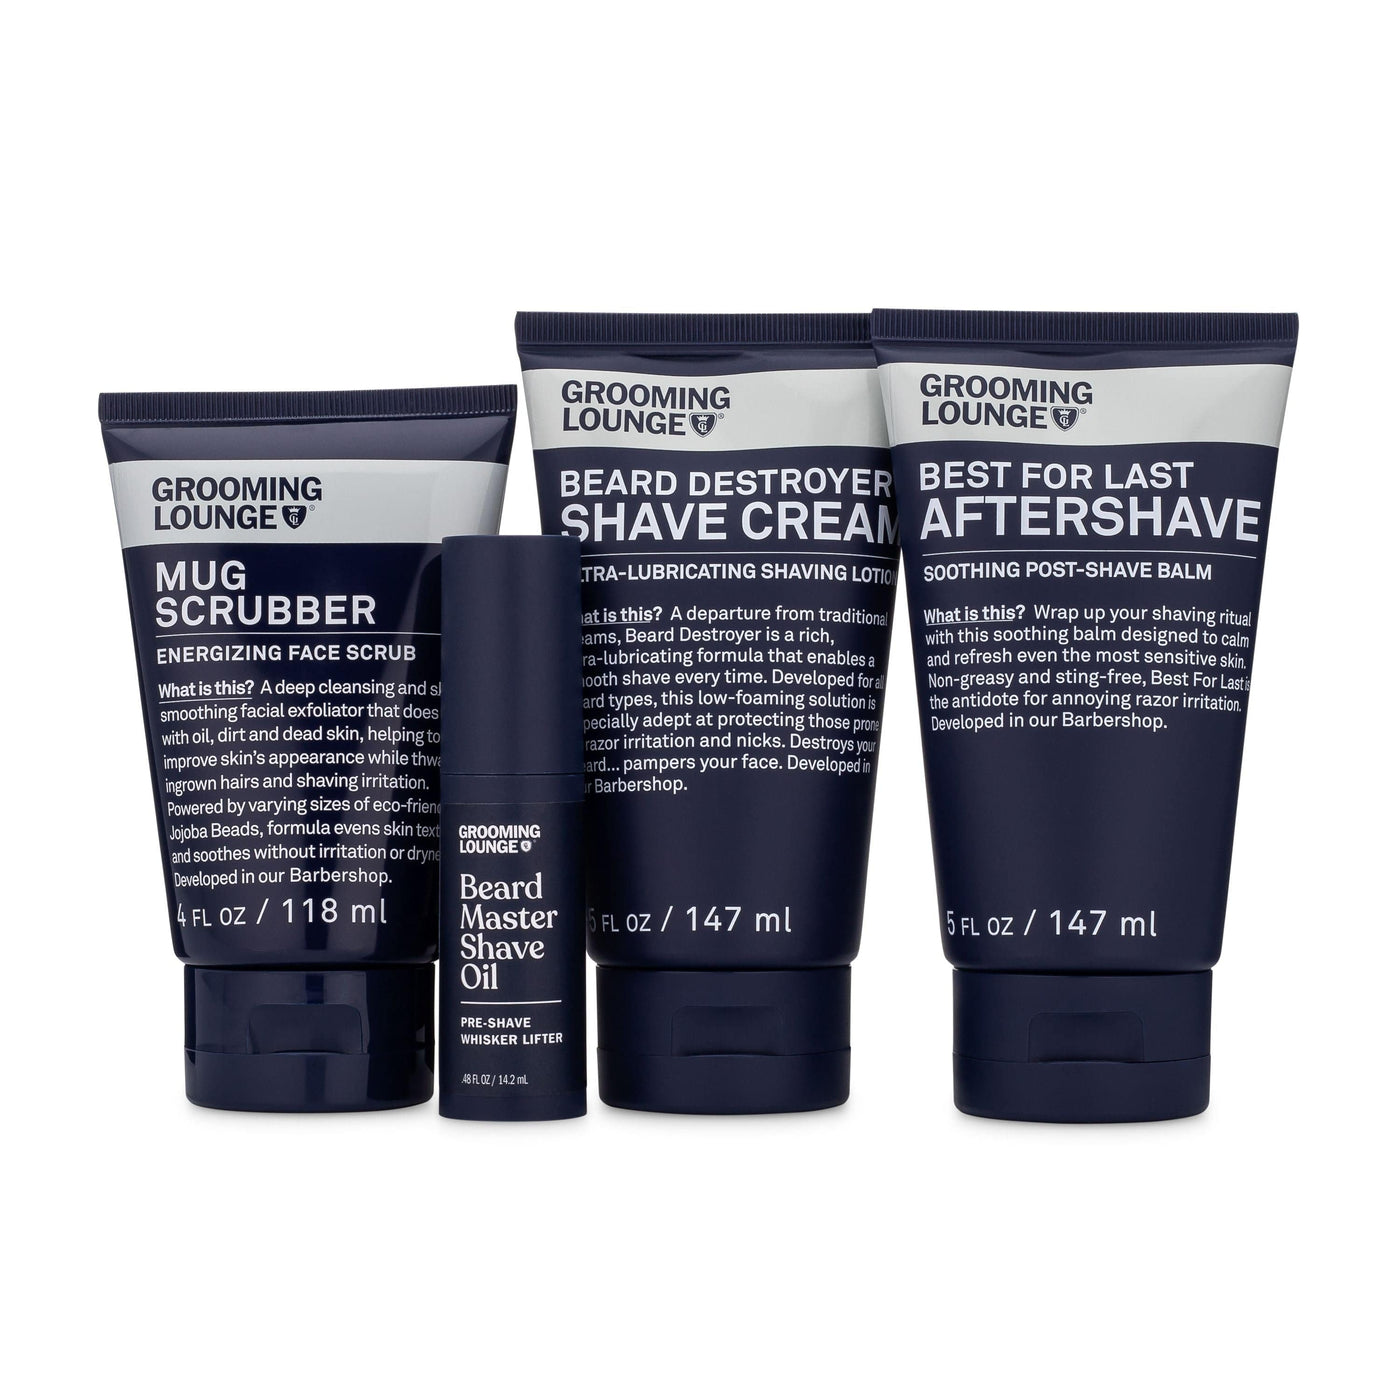 Grooming Lounge The Greatest Shave Ever Kit (Save $25) by Grooming Lounge